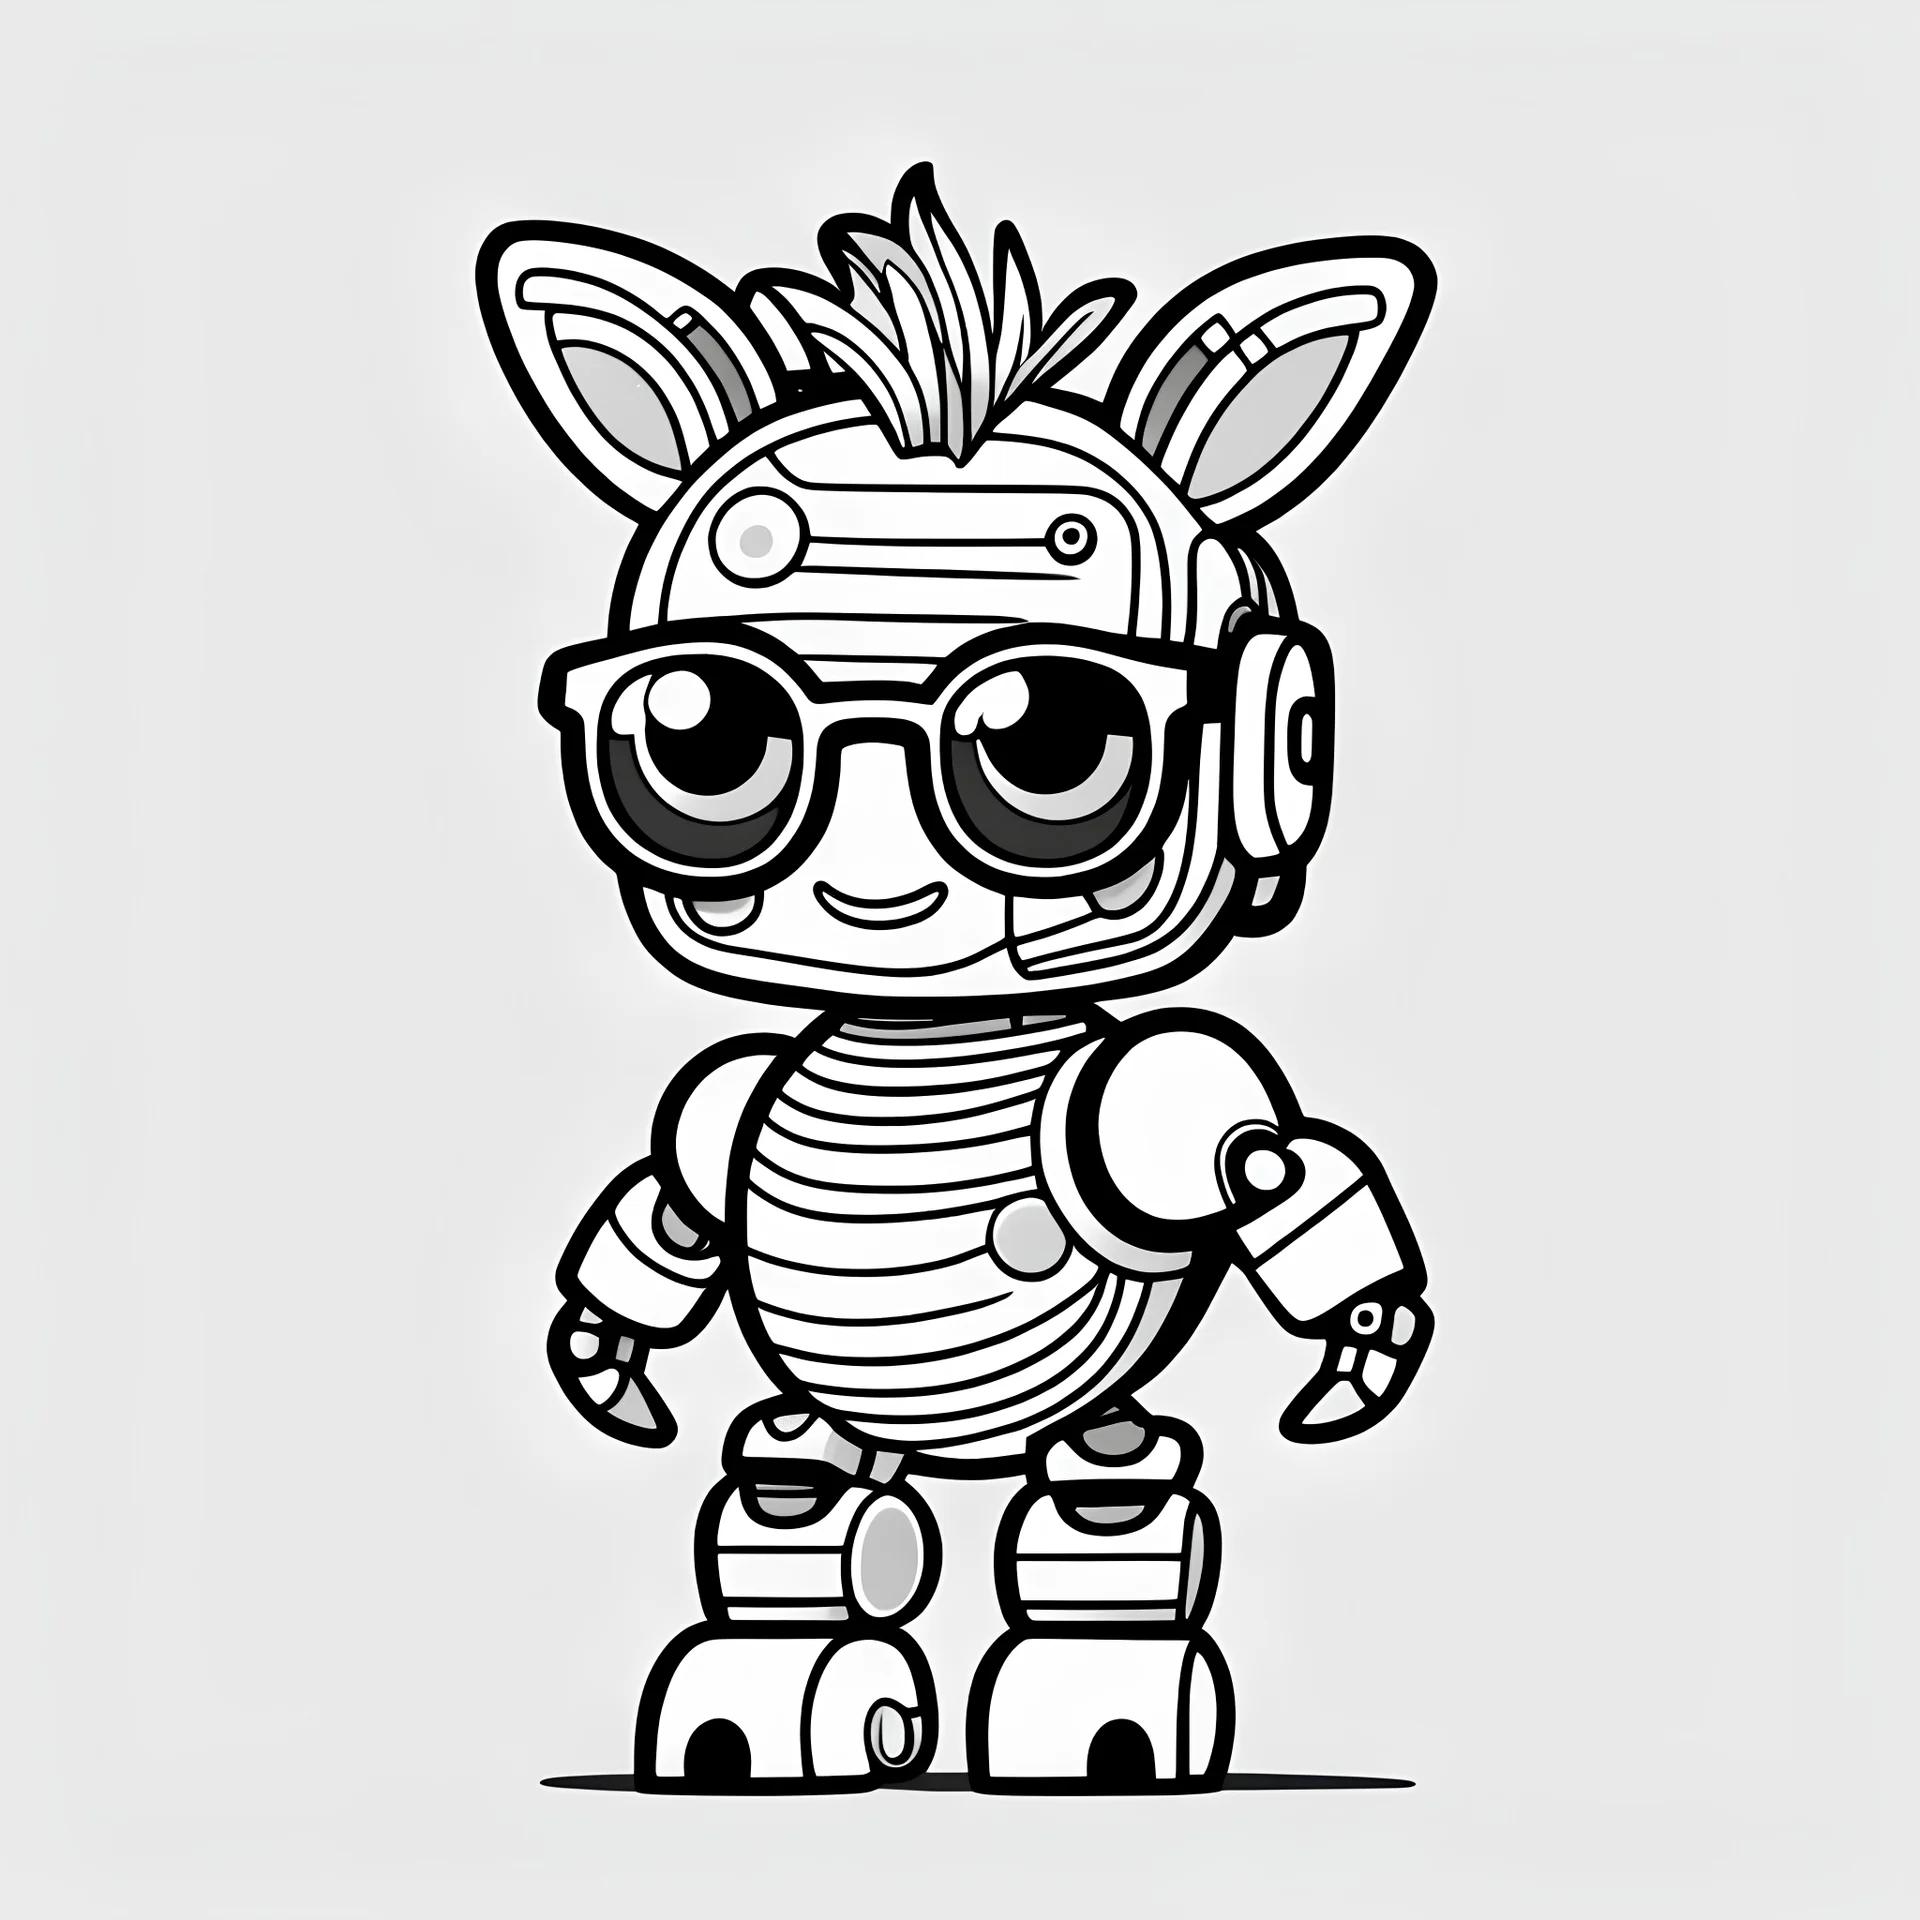 coloring page, no shadow, no shading , minimalistic art , High Quality Pixels a Cute and Playful kawaii Zebra robot, add sunglass , thick line , blod line, very low details, with white background, simple coloring page